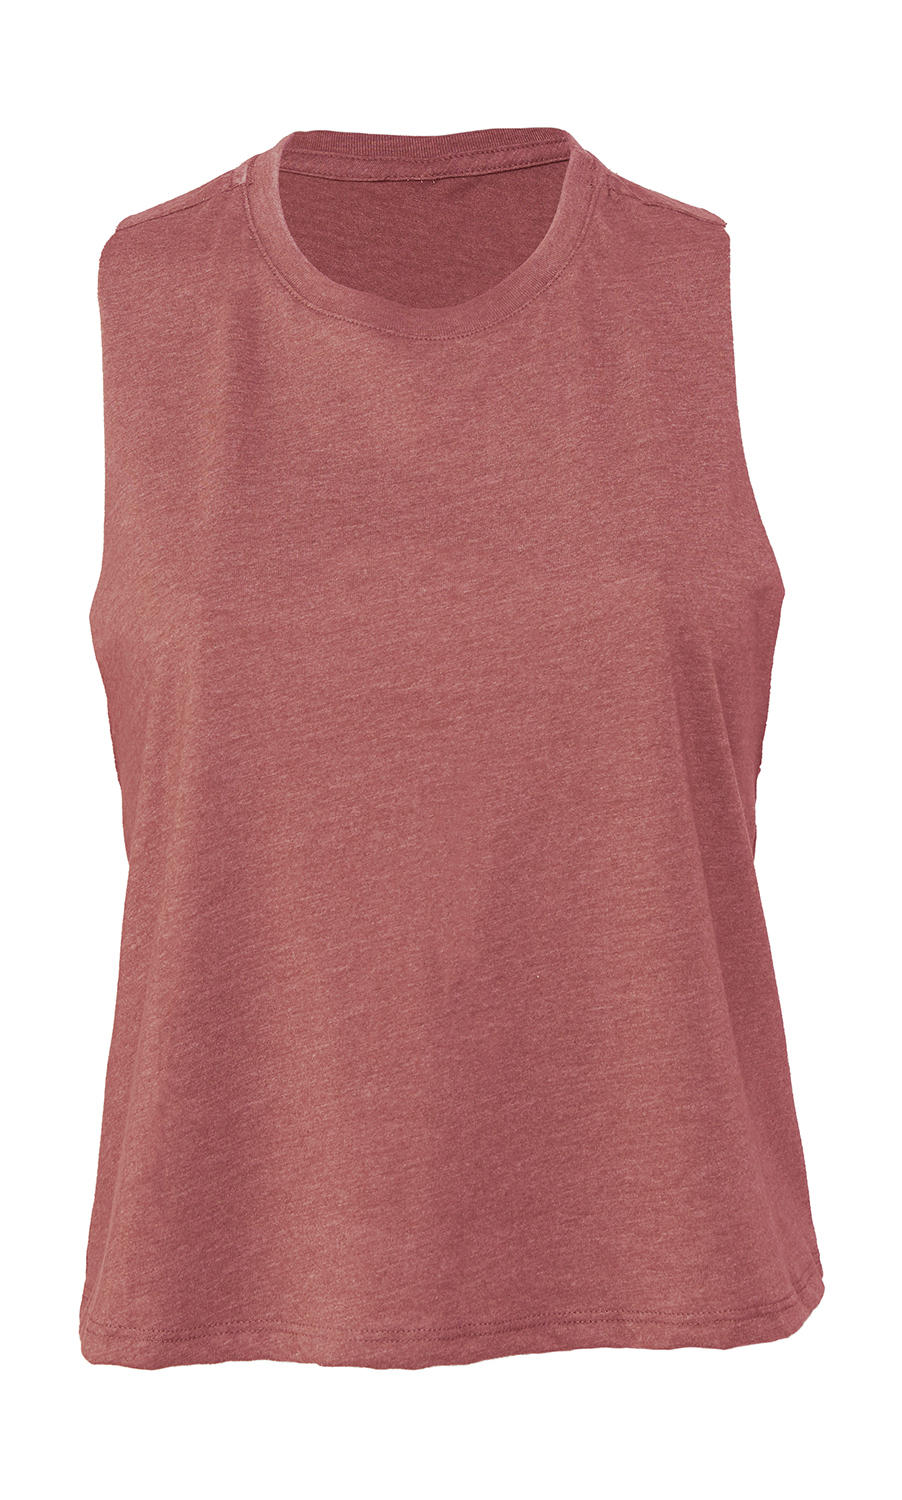  Womens Racerback Cropped Tank in Farbe Heather Mauve